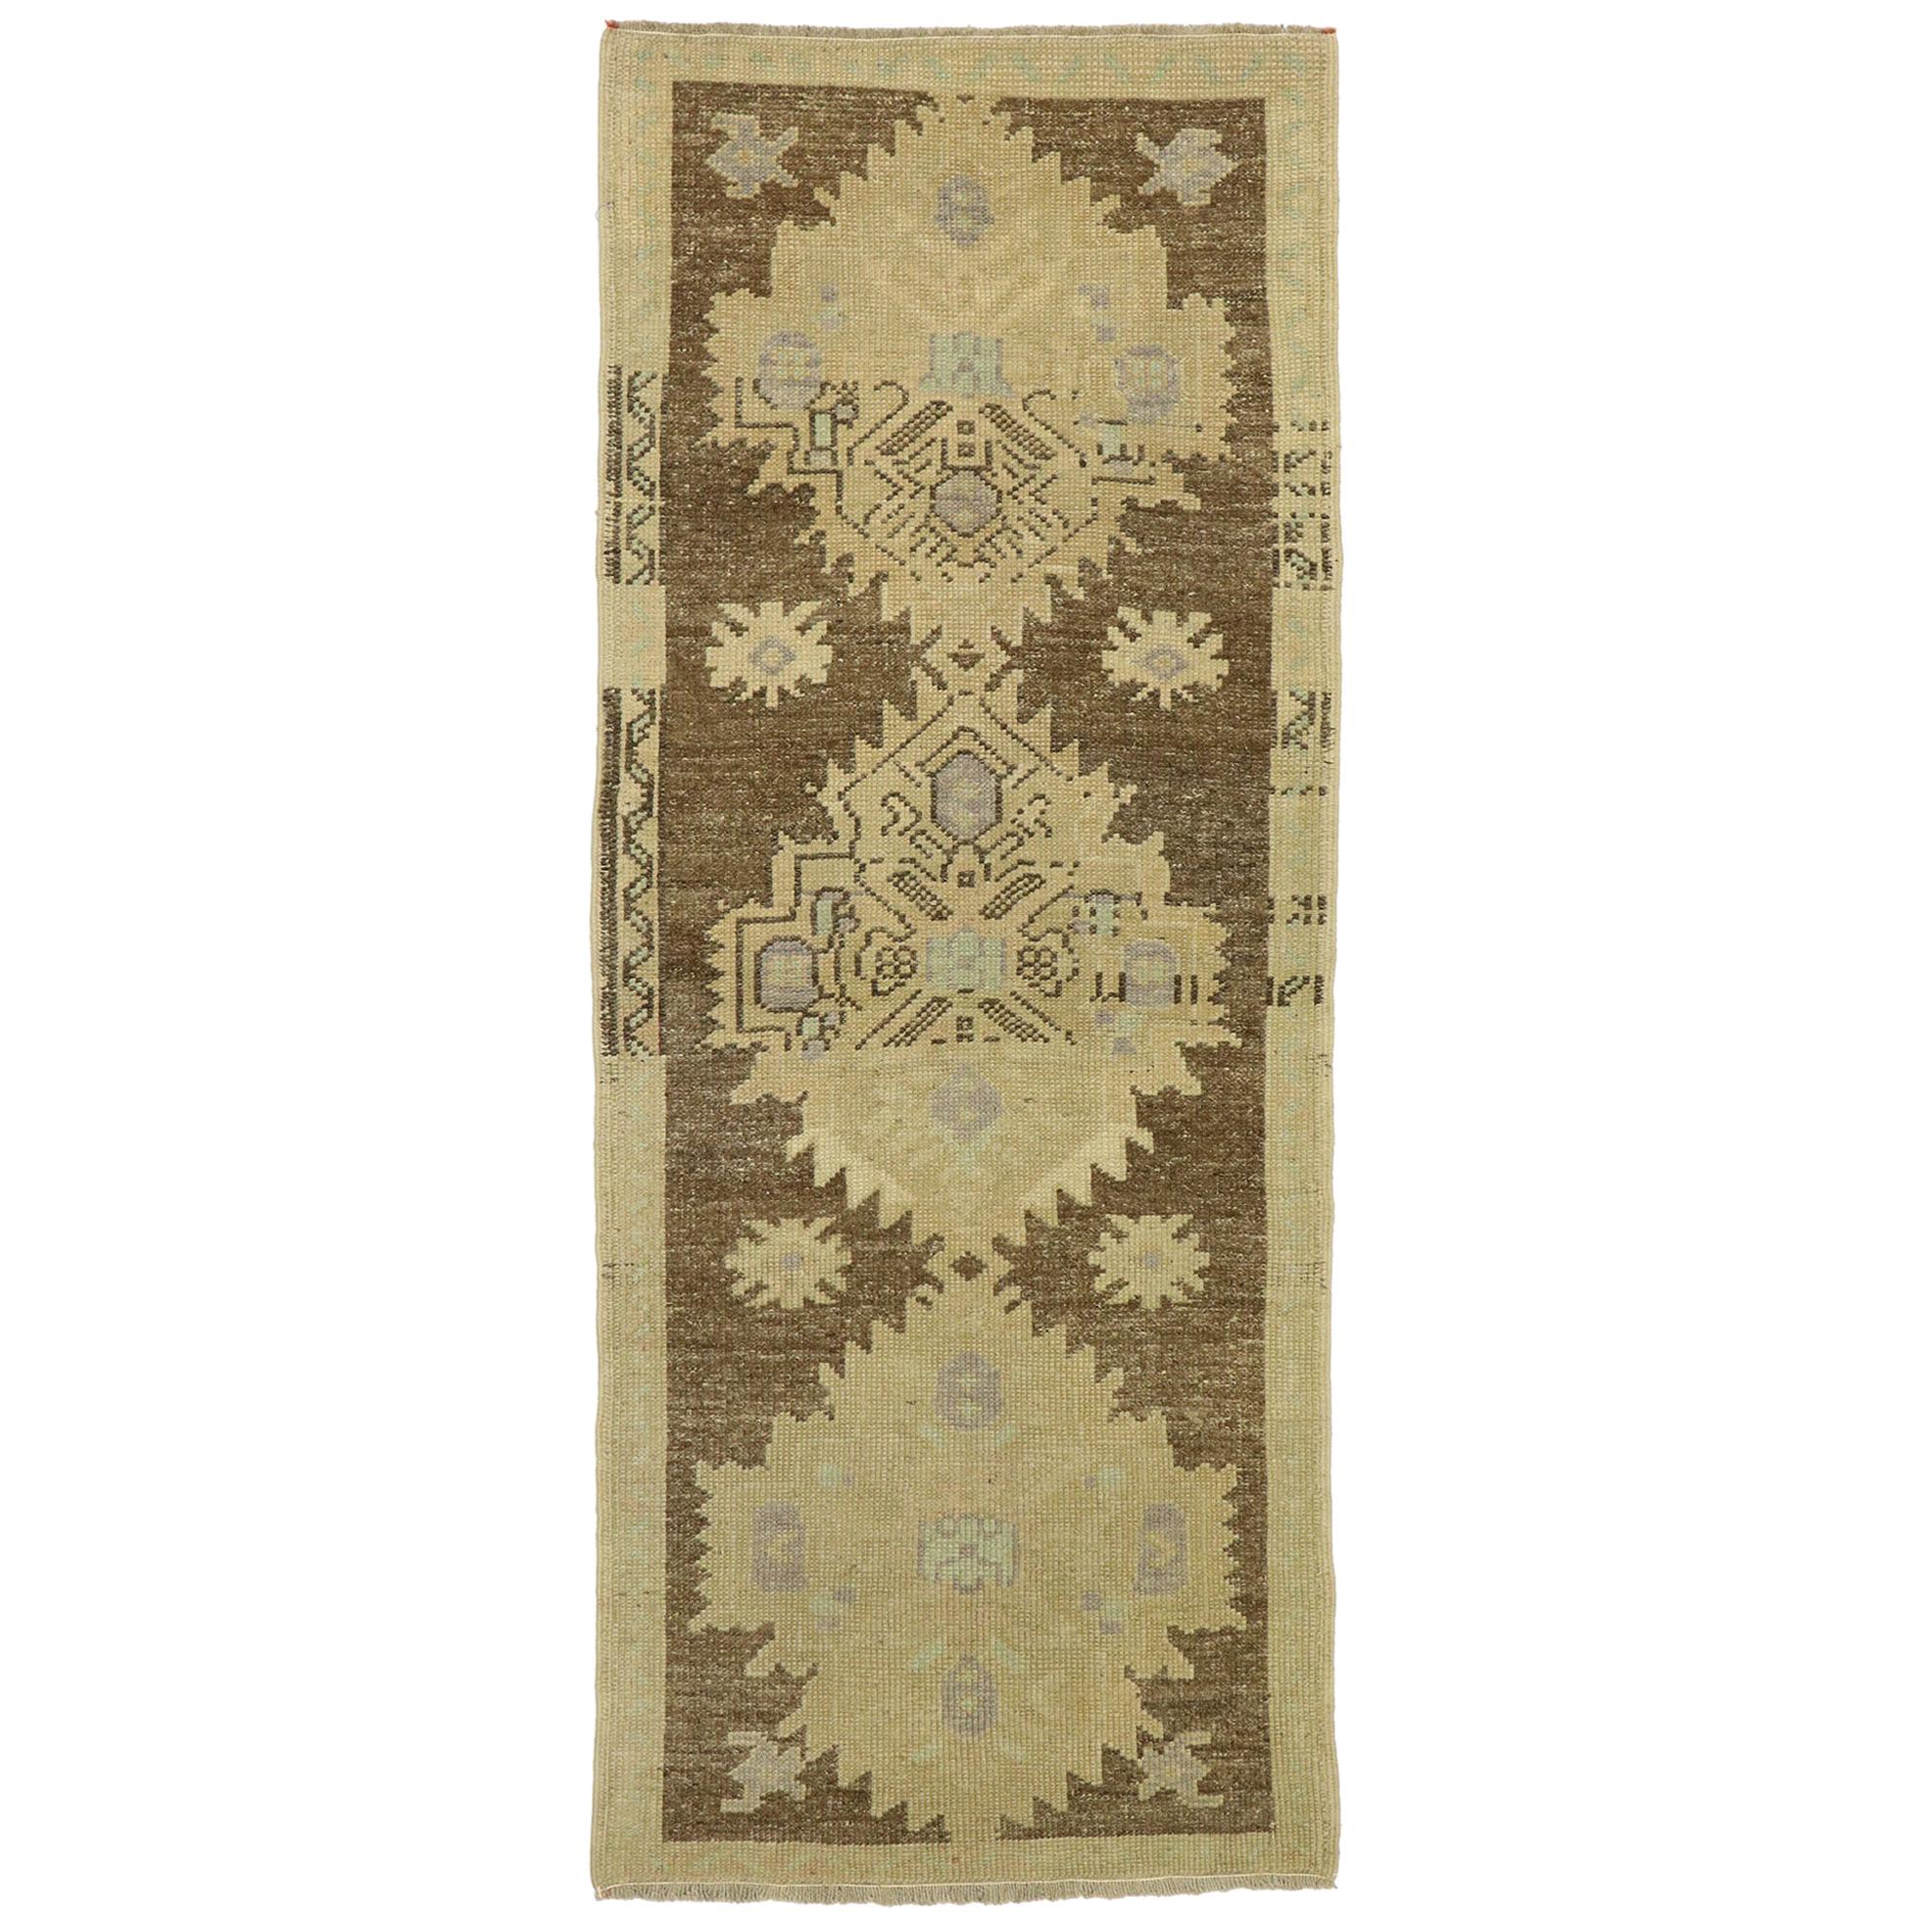 Vintage Turkish Oushak Accent Rug with Rustic Shaker Farmhouse Style